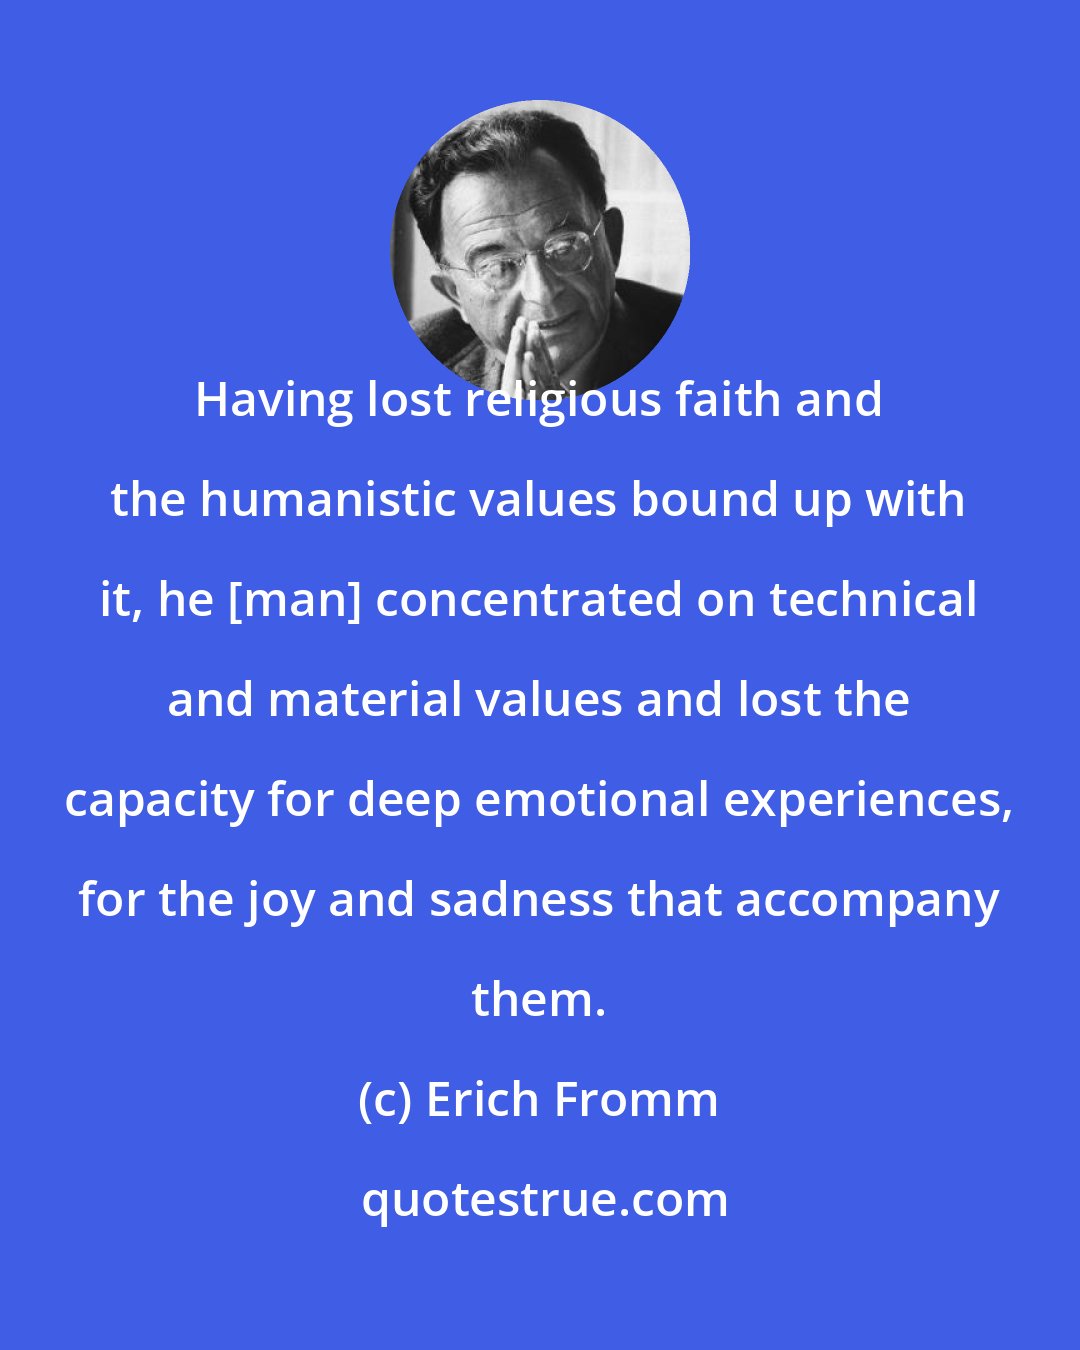 Erich Fromm: Having lost religious faith and the humanistic values bound up with it, he [man] concentrated on technical and material values and lost the capacity for deep emotional experiences, for the joy and sadness that accompany them.